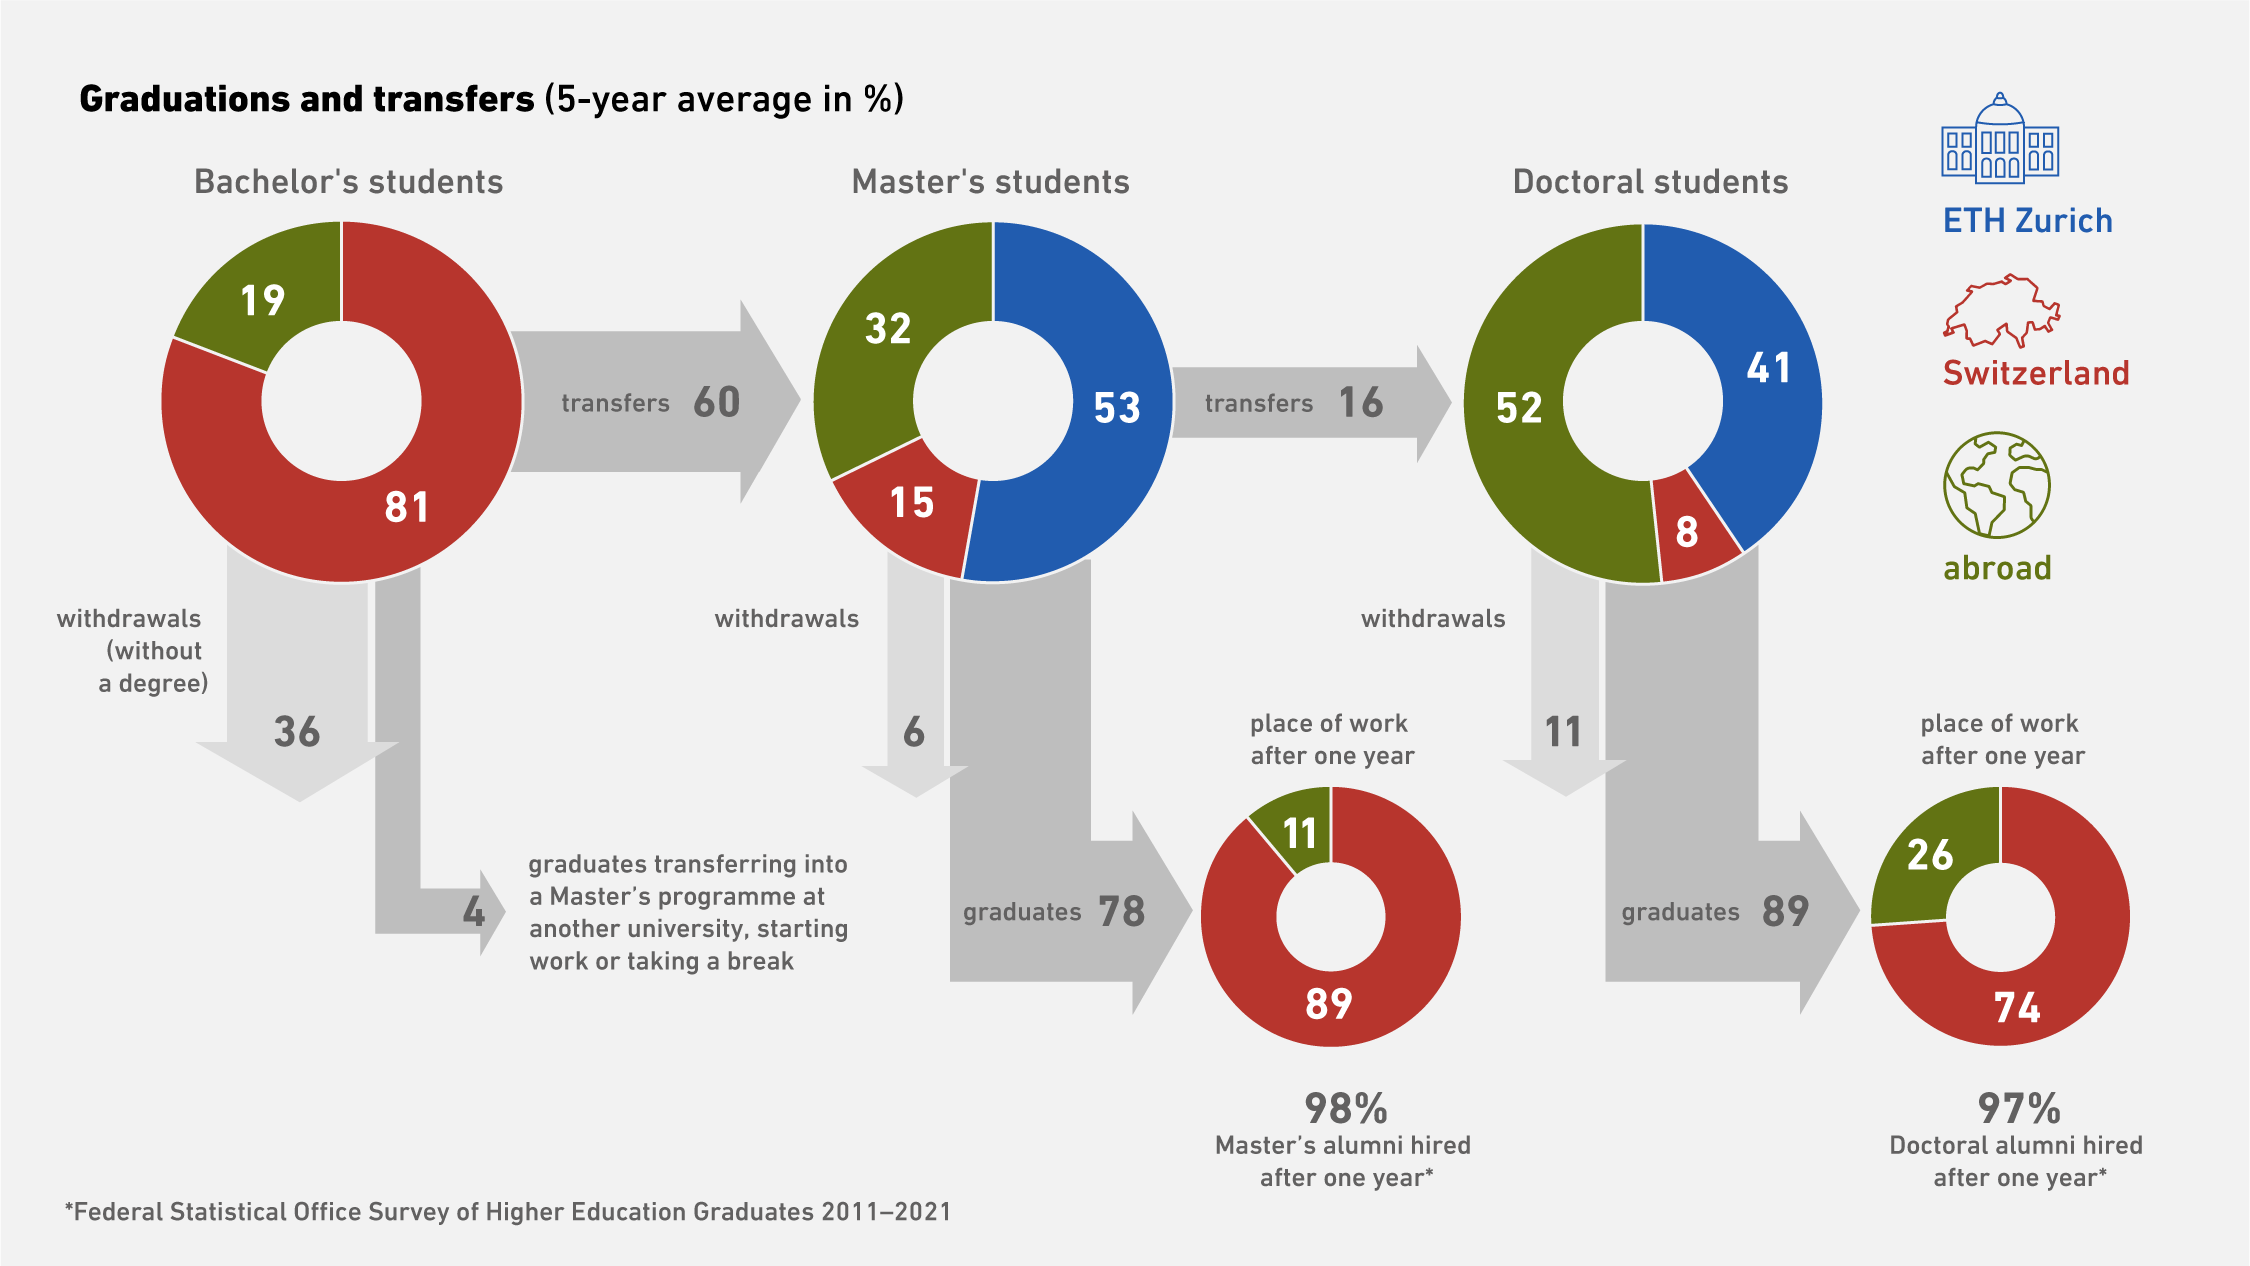 Enlarged view: Graphic showing the five-year average of graduations and transfers as a percentage.